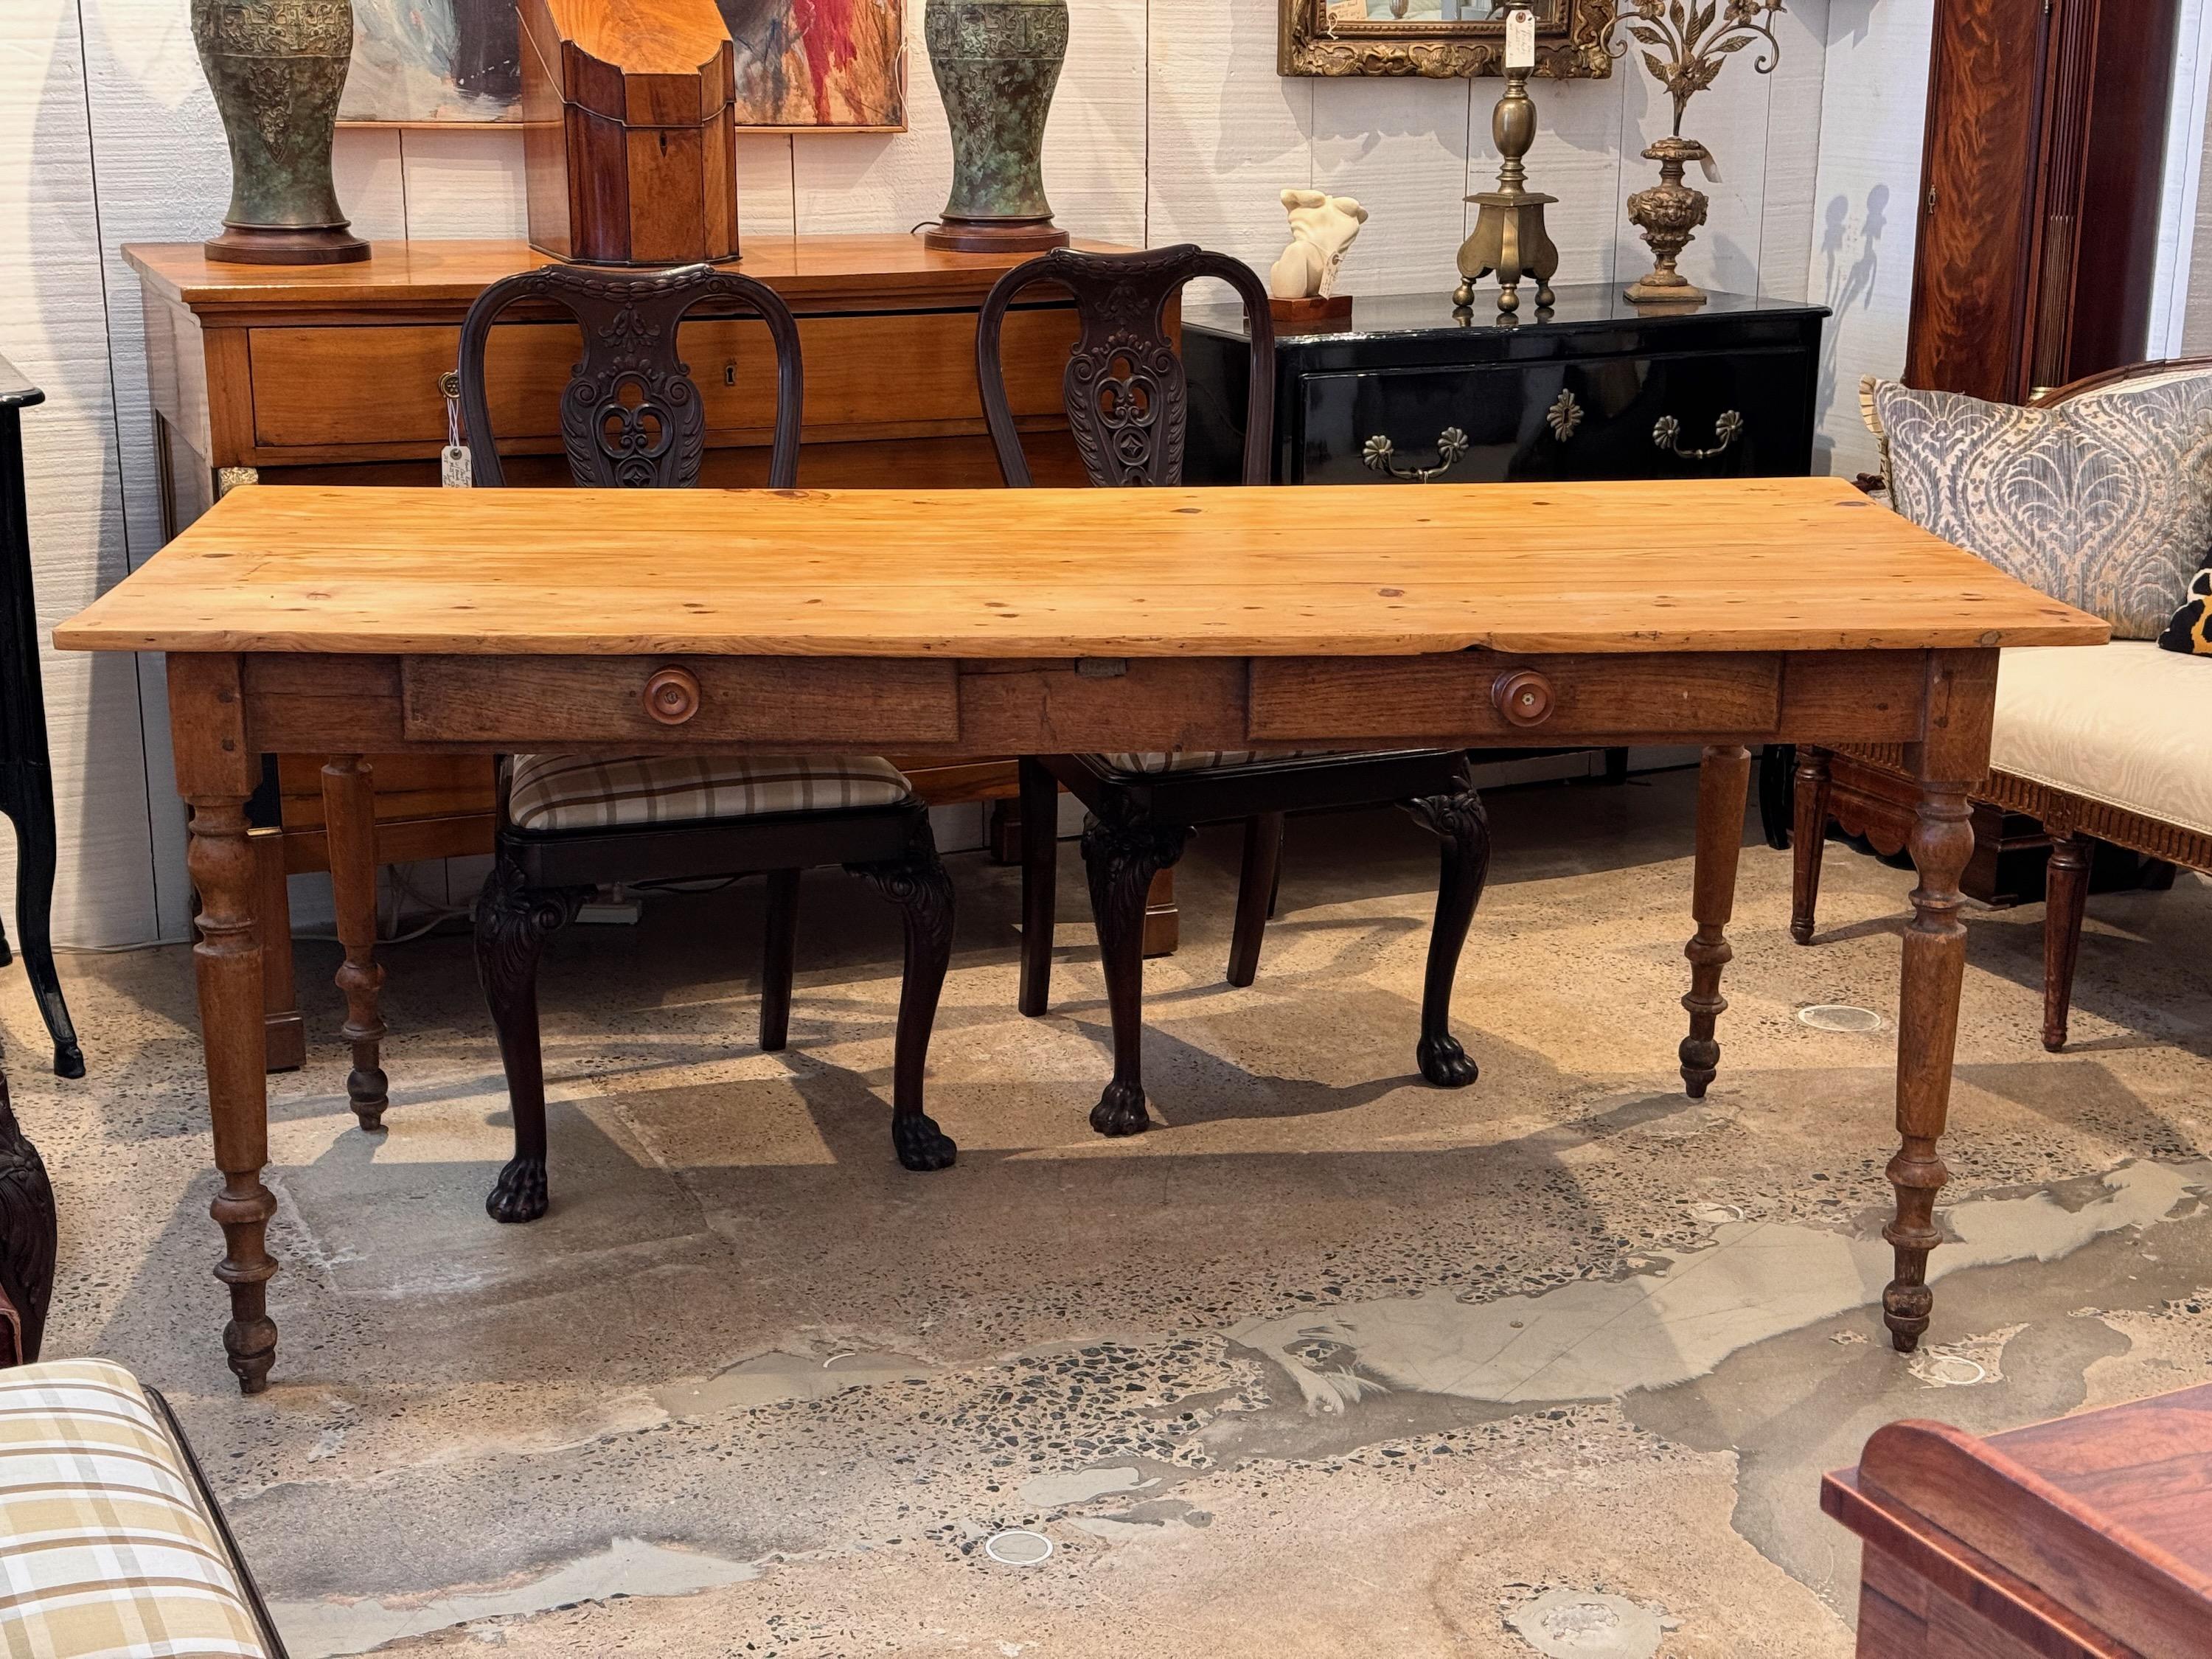 A functional and beautiful farm table. For casual dining.